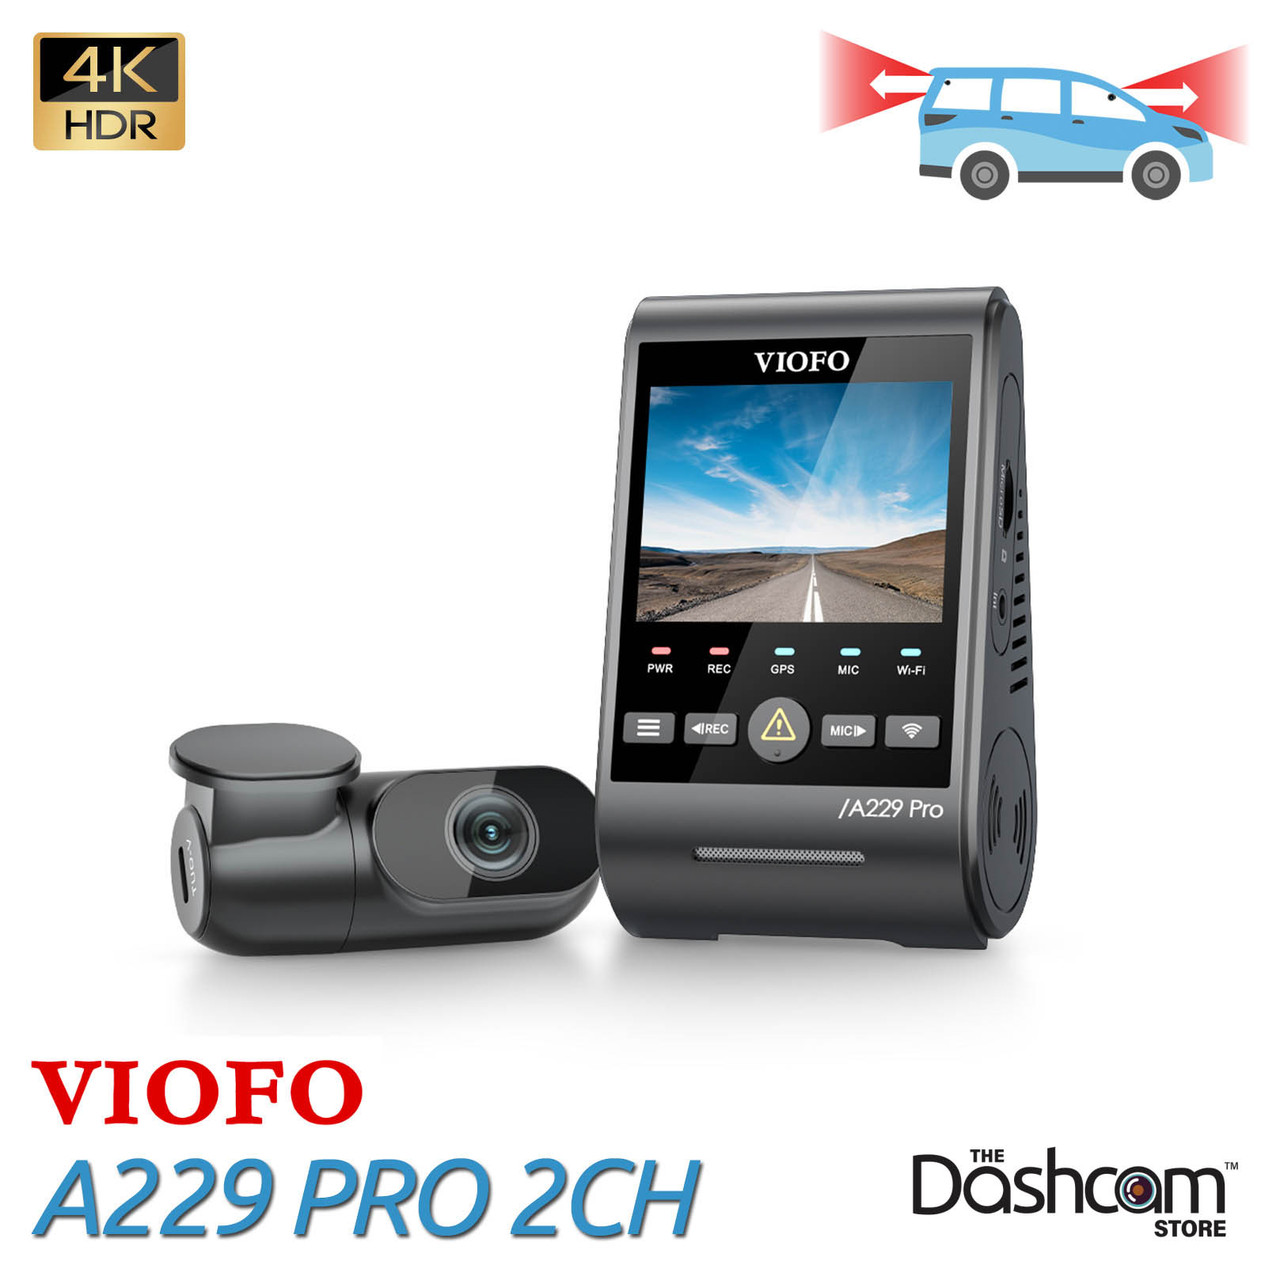 https://cdn11.bigcommerce.com/s-za60ms/images/stencil/1280x1280/products/900/14172/thedashcamstore.com-viofo-a229-pro-duo-2ch-dash-cam-2__03619.1698780423.jpg?c=2